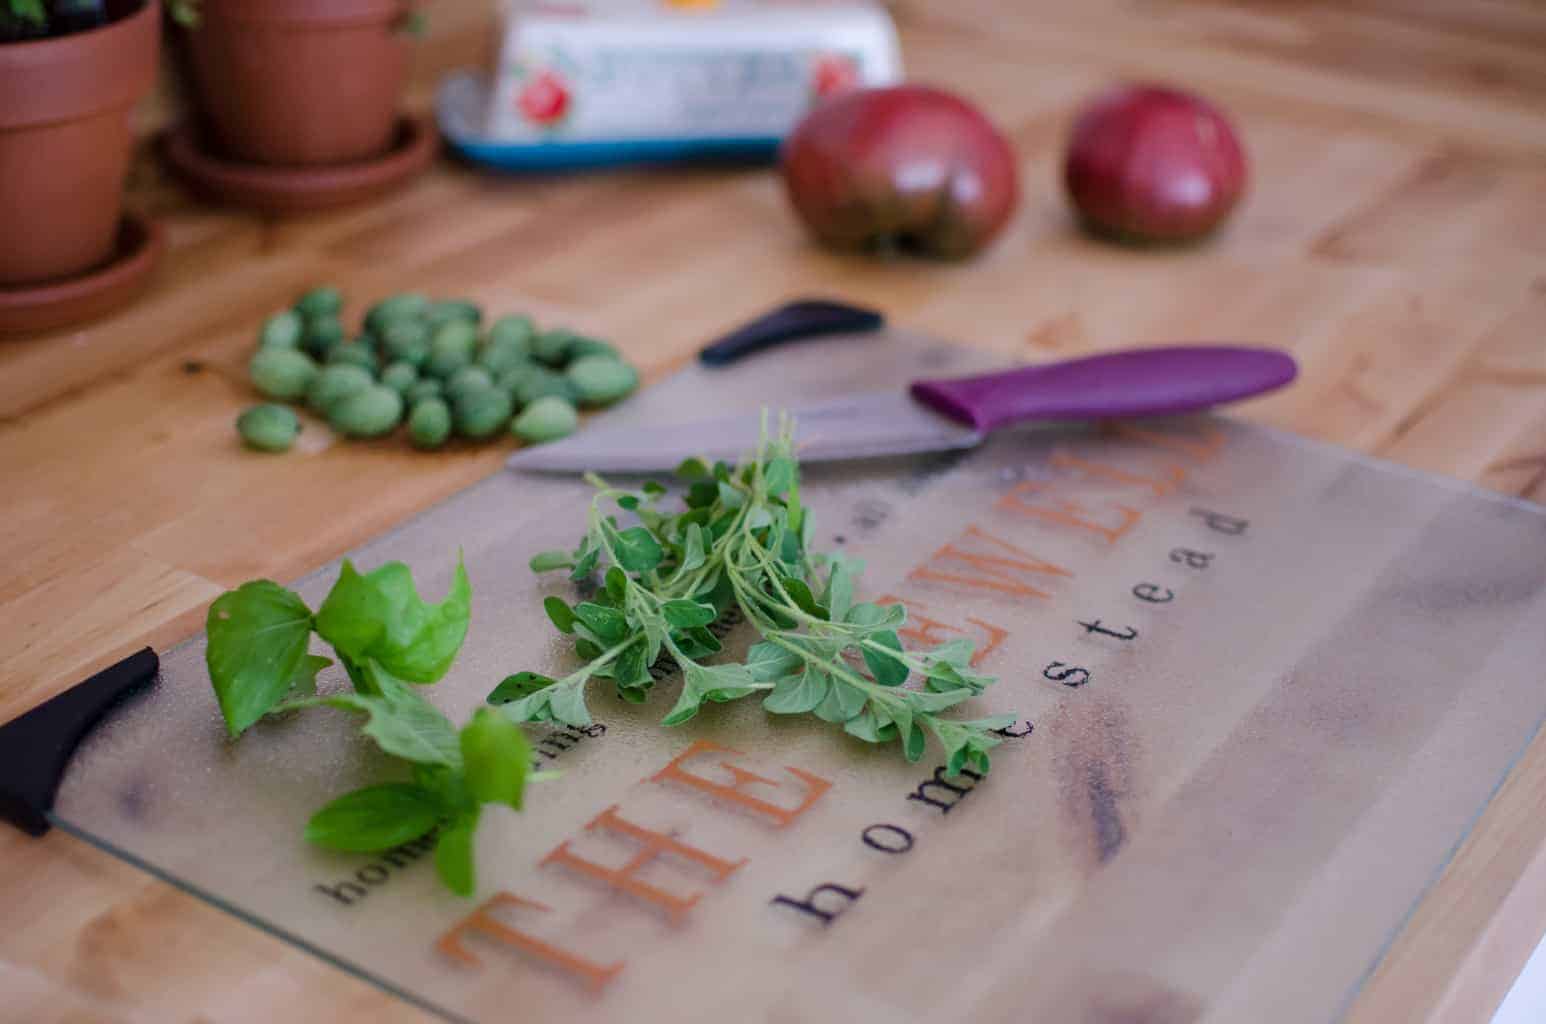 drying your own herbs